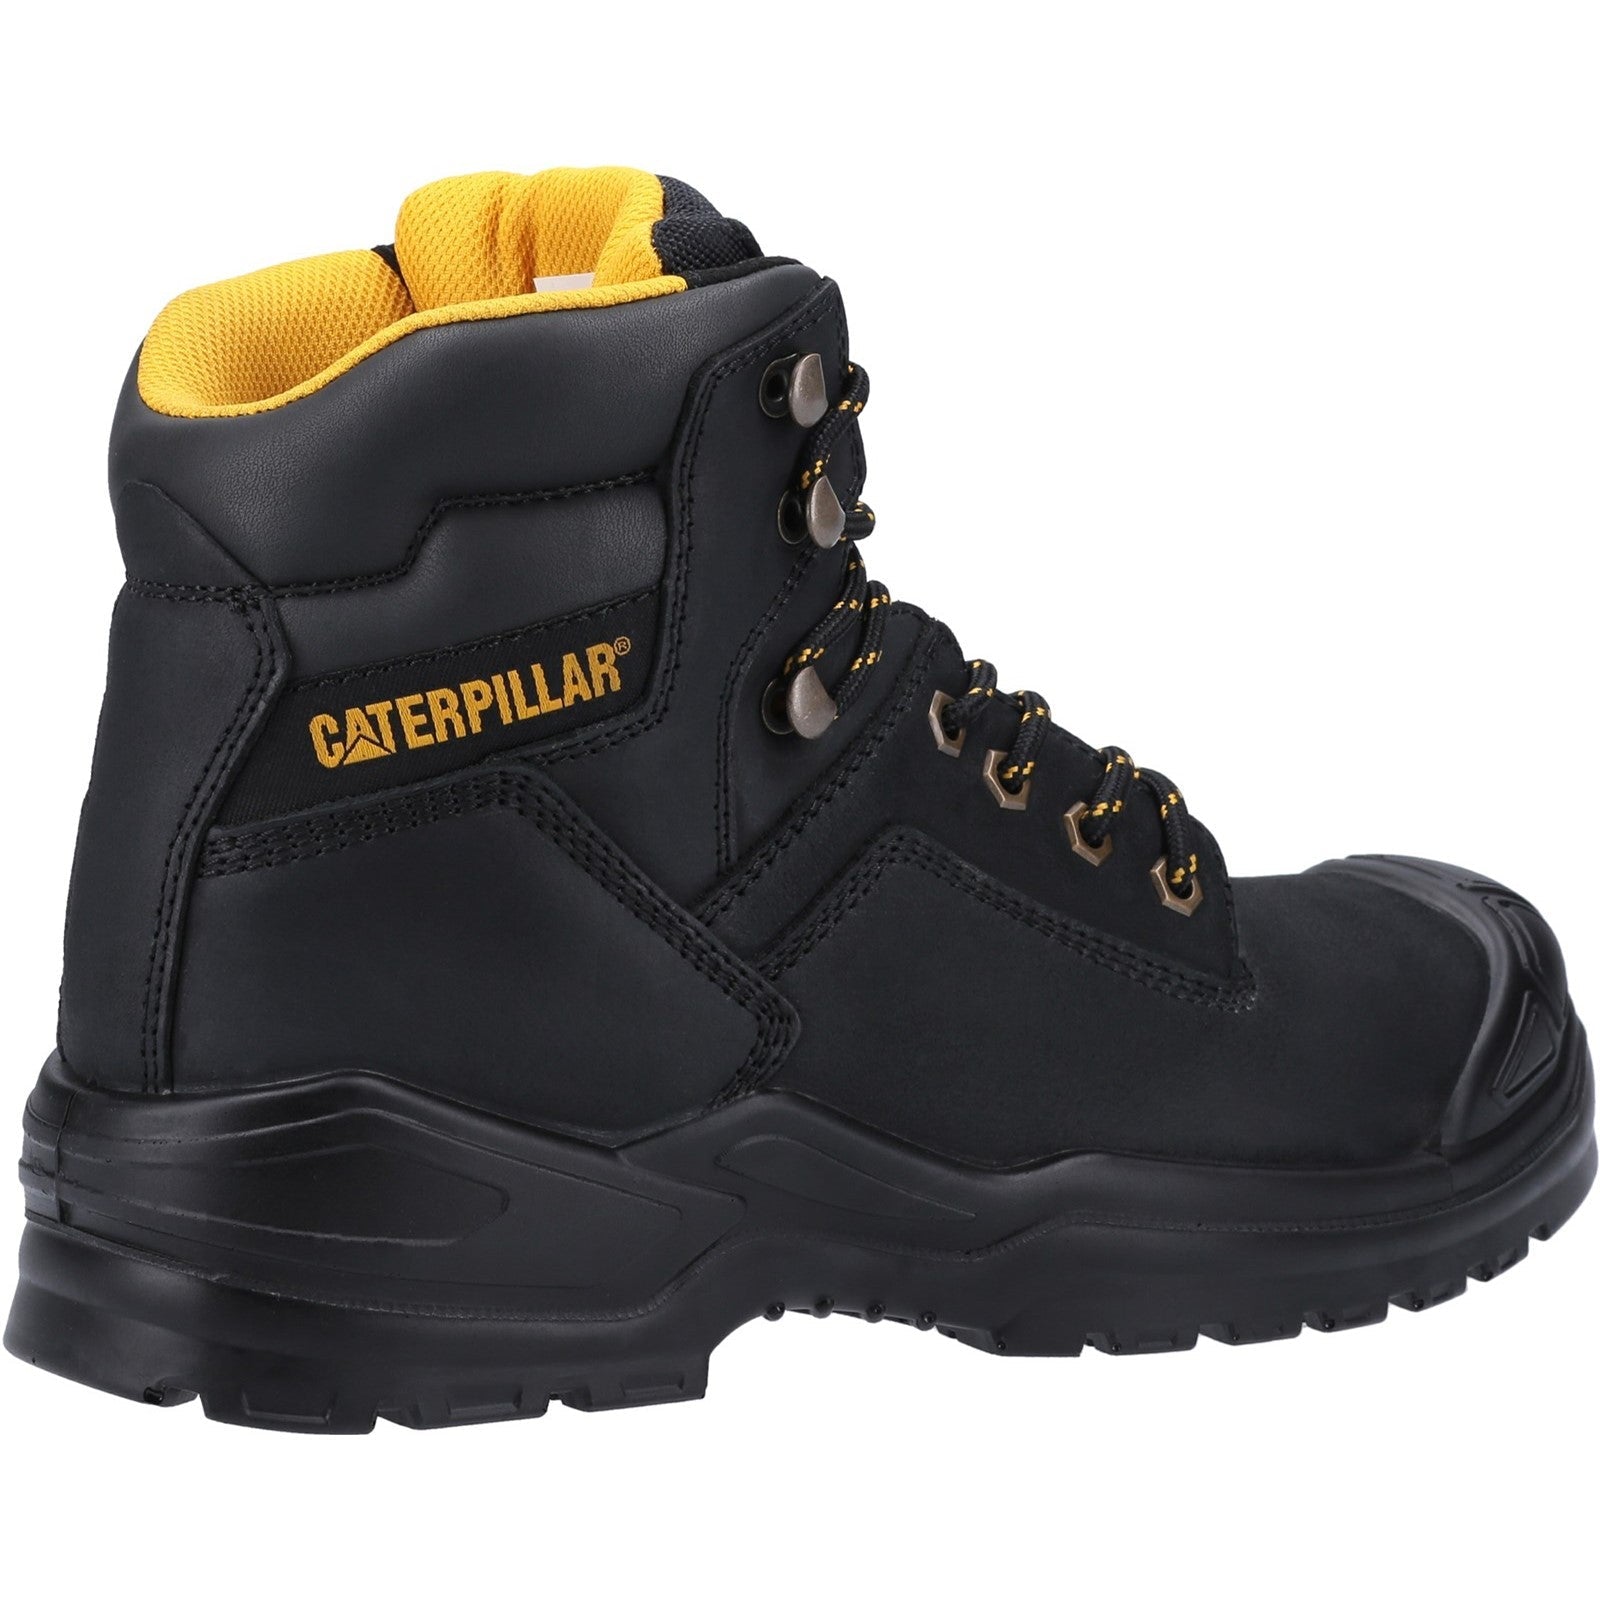 Caterpillar Striver Mid S3 Safety Boot in Black 